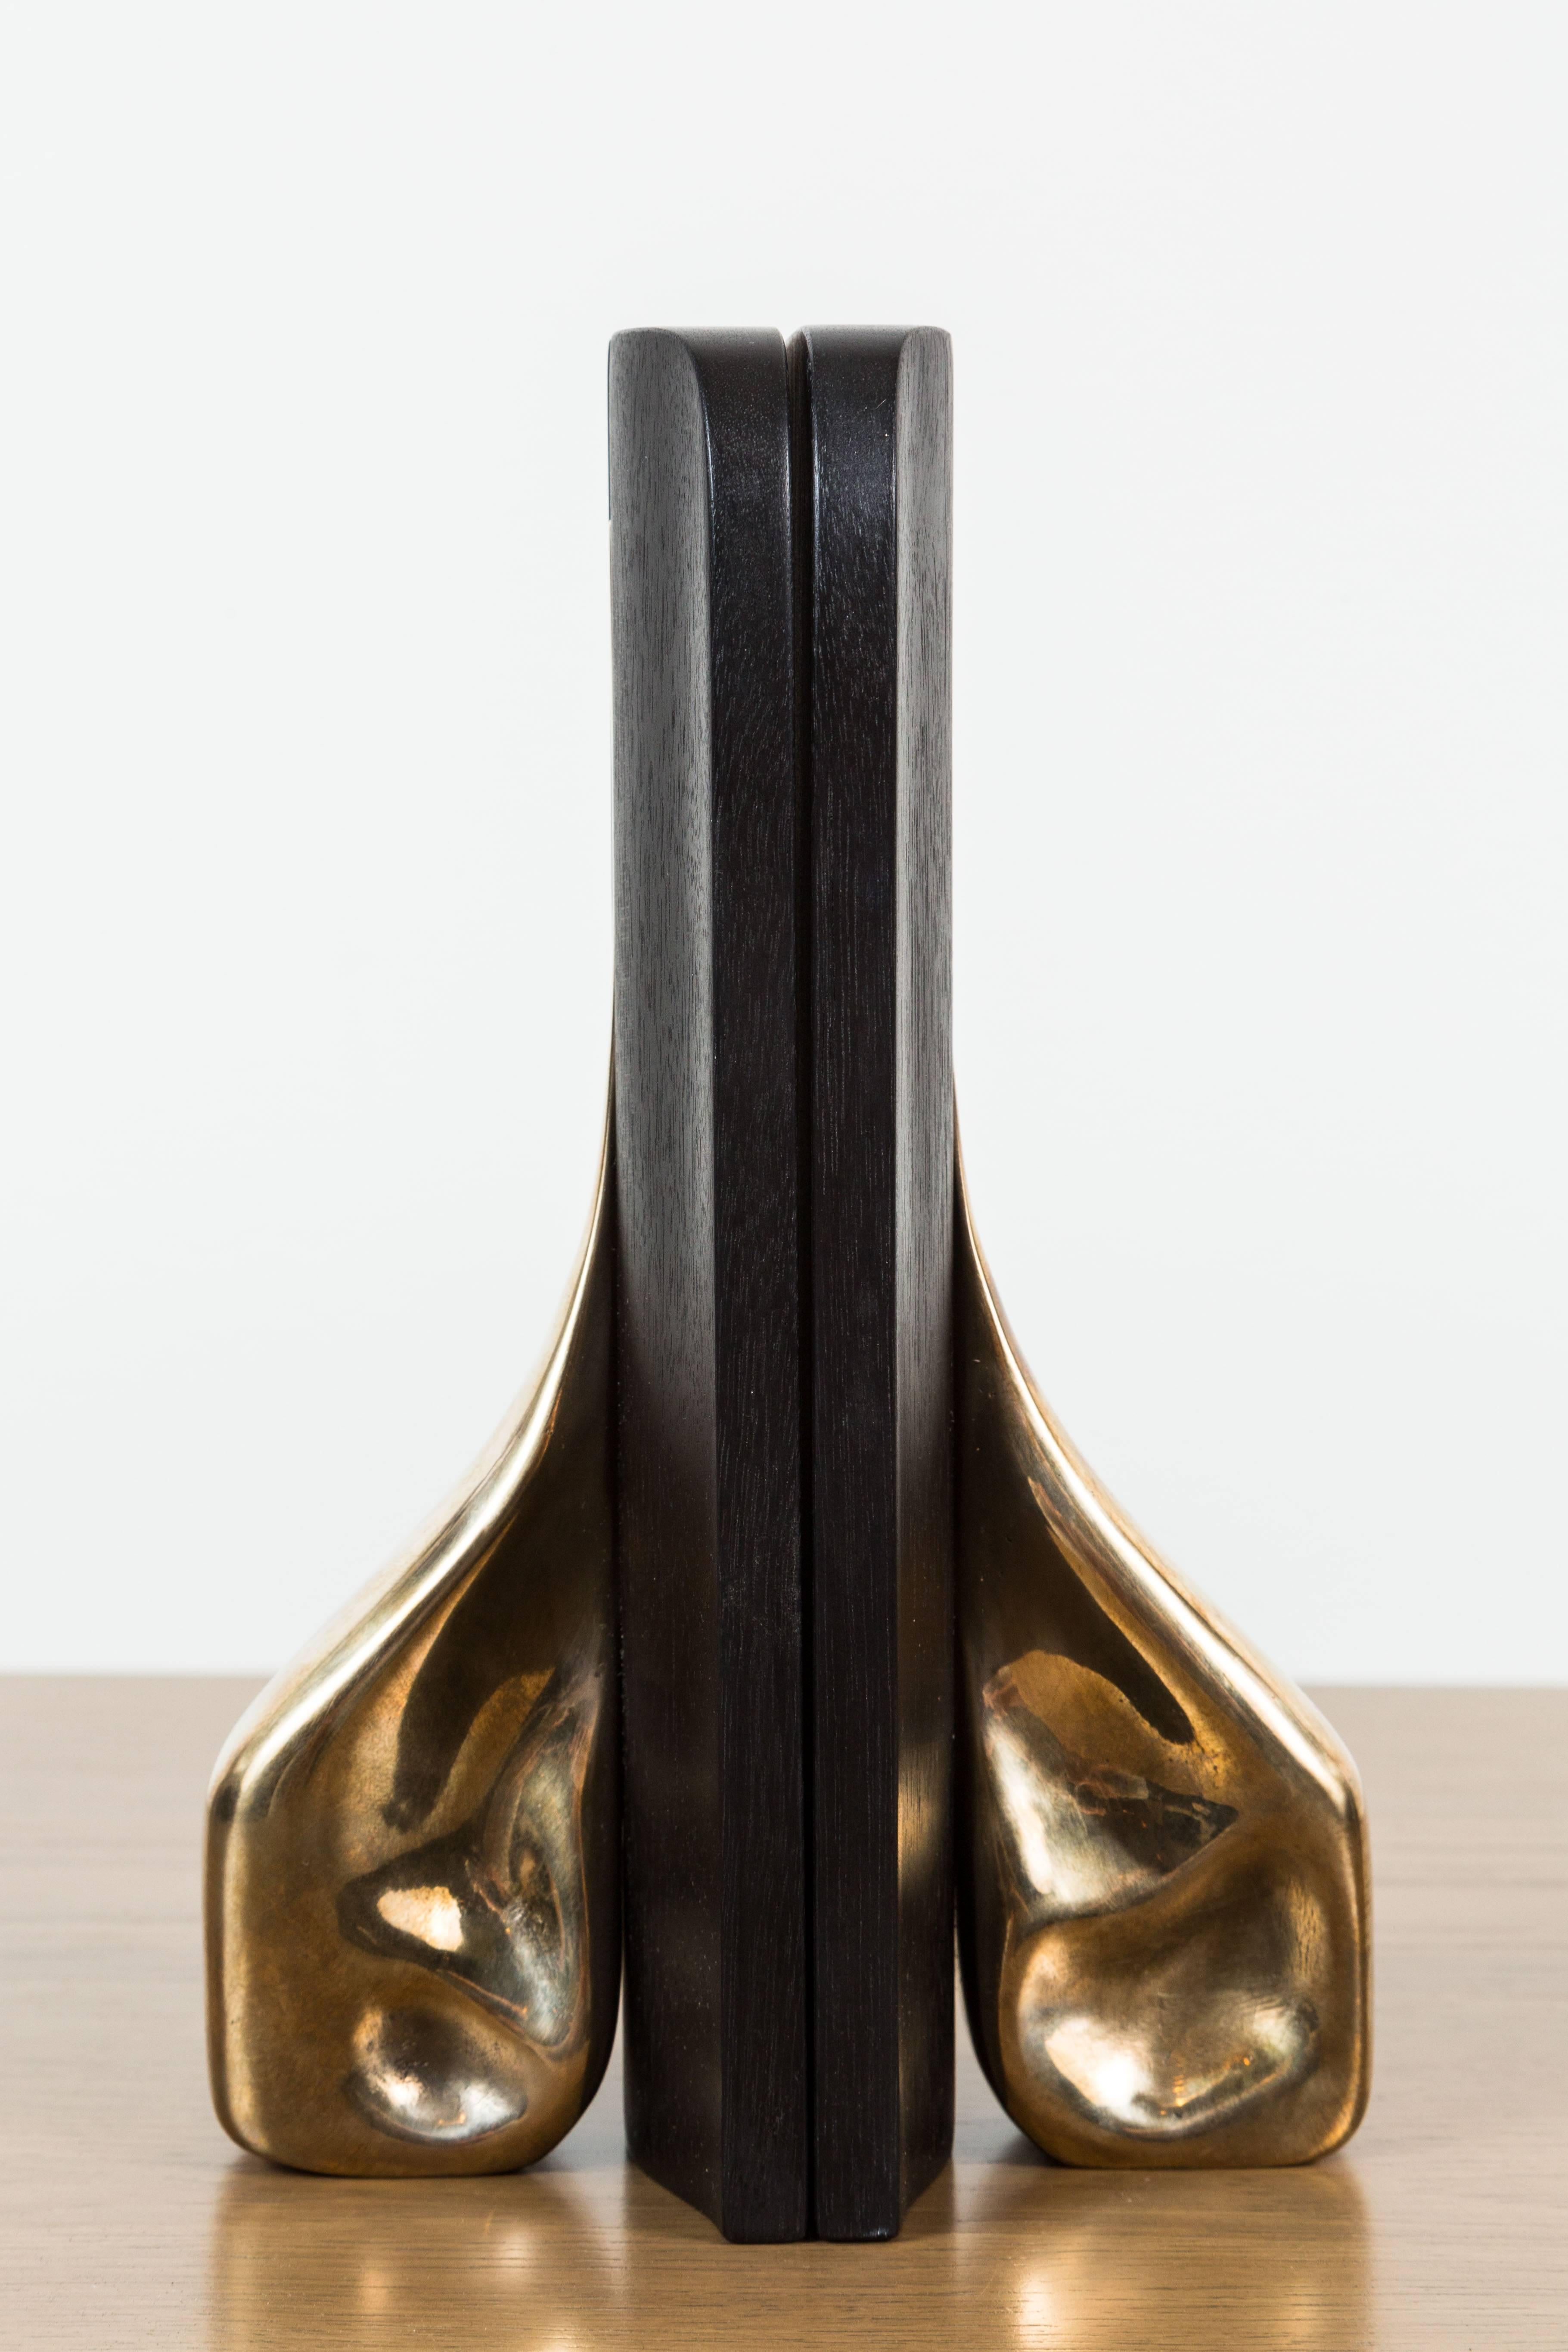 American Pair of Ebonized Walnut and Cast Bronze Bookends by Vincent Pocsik